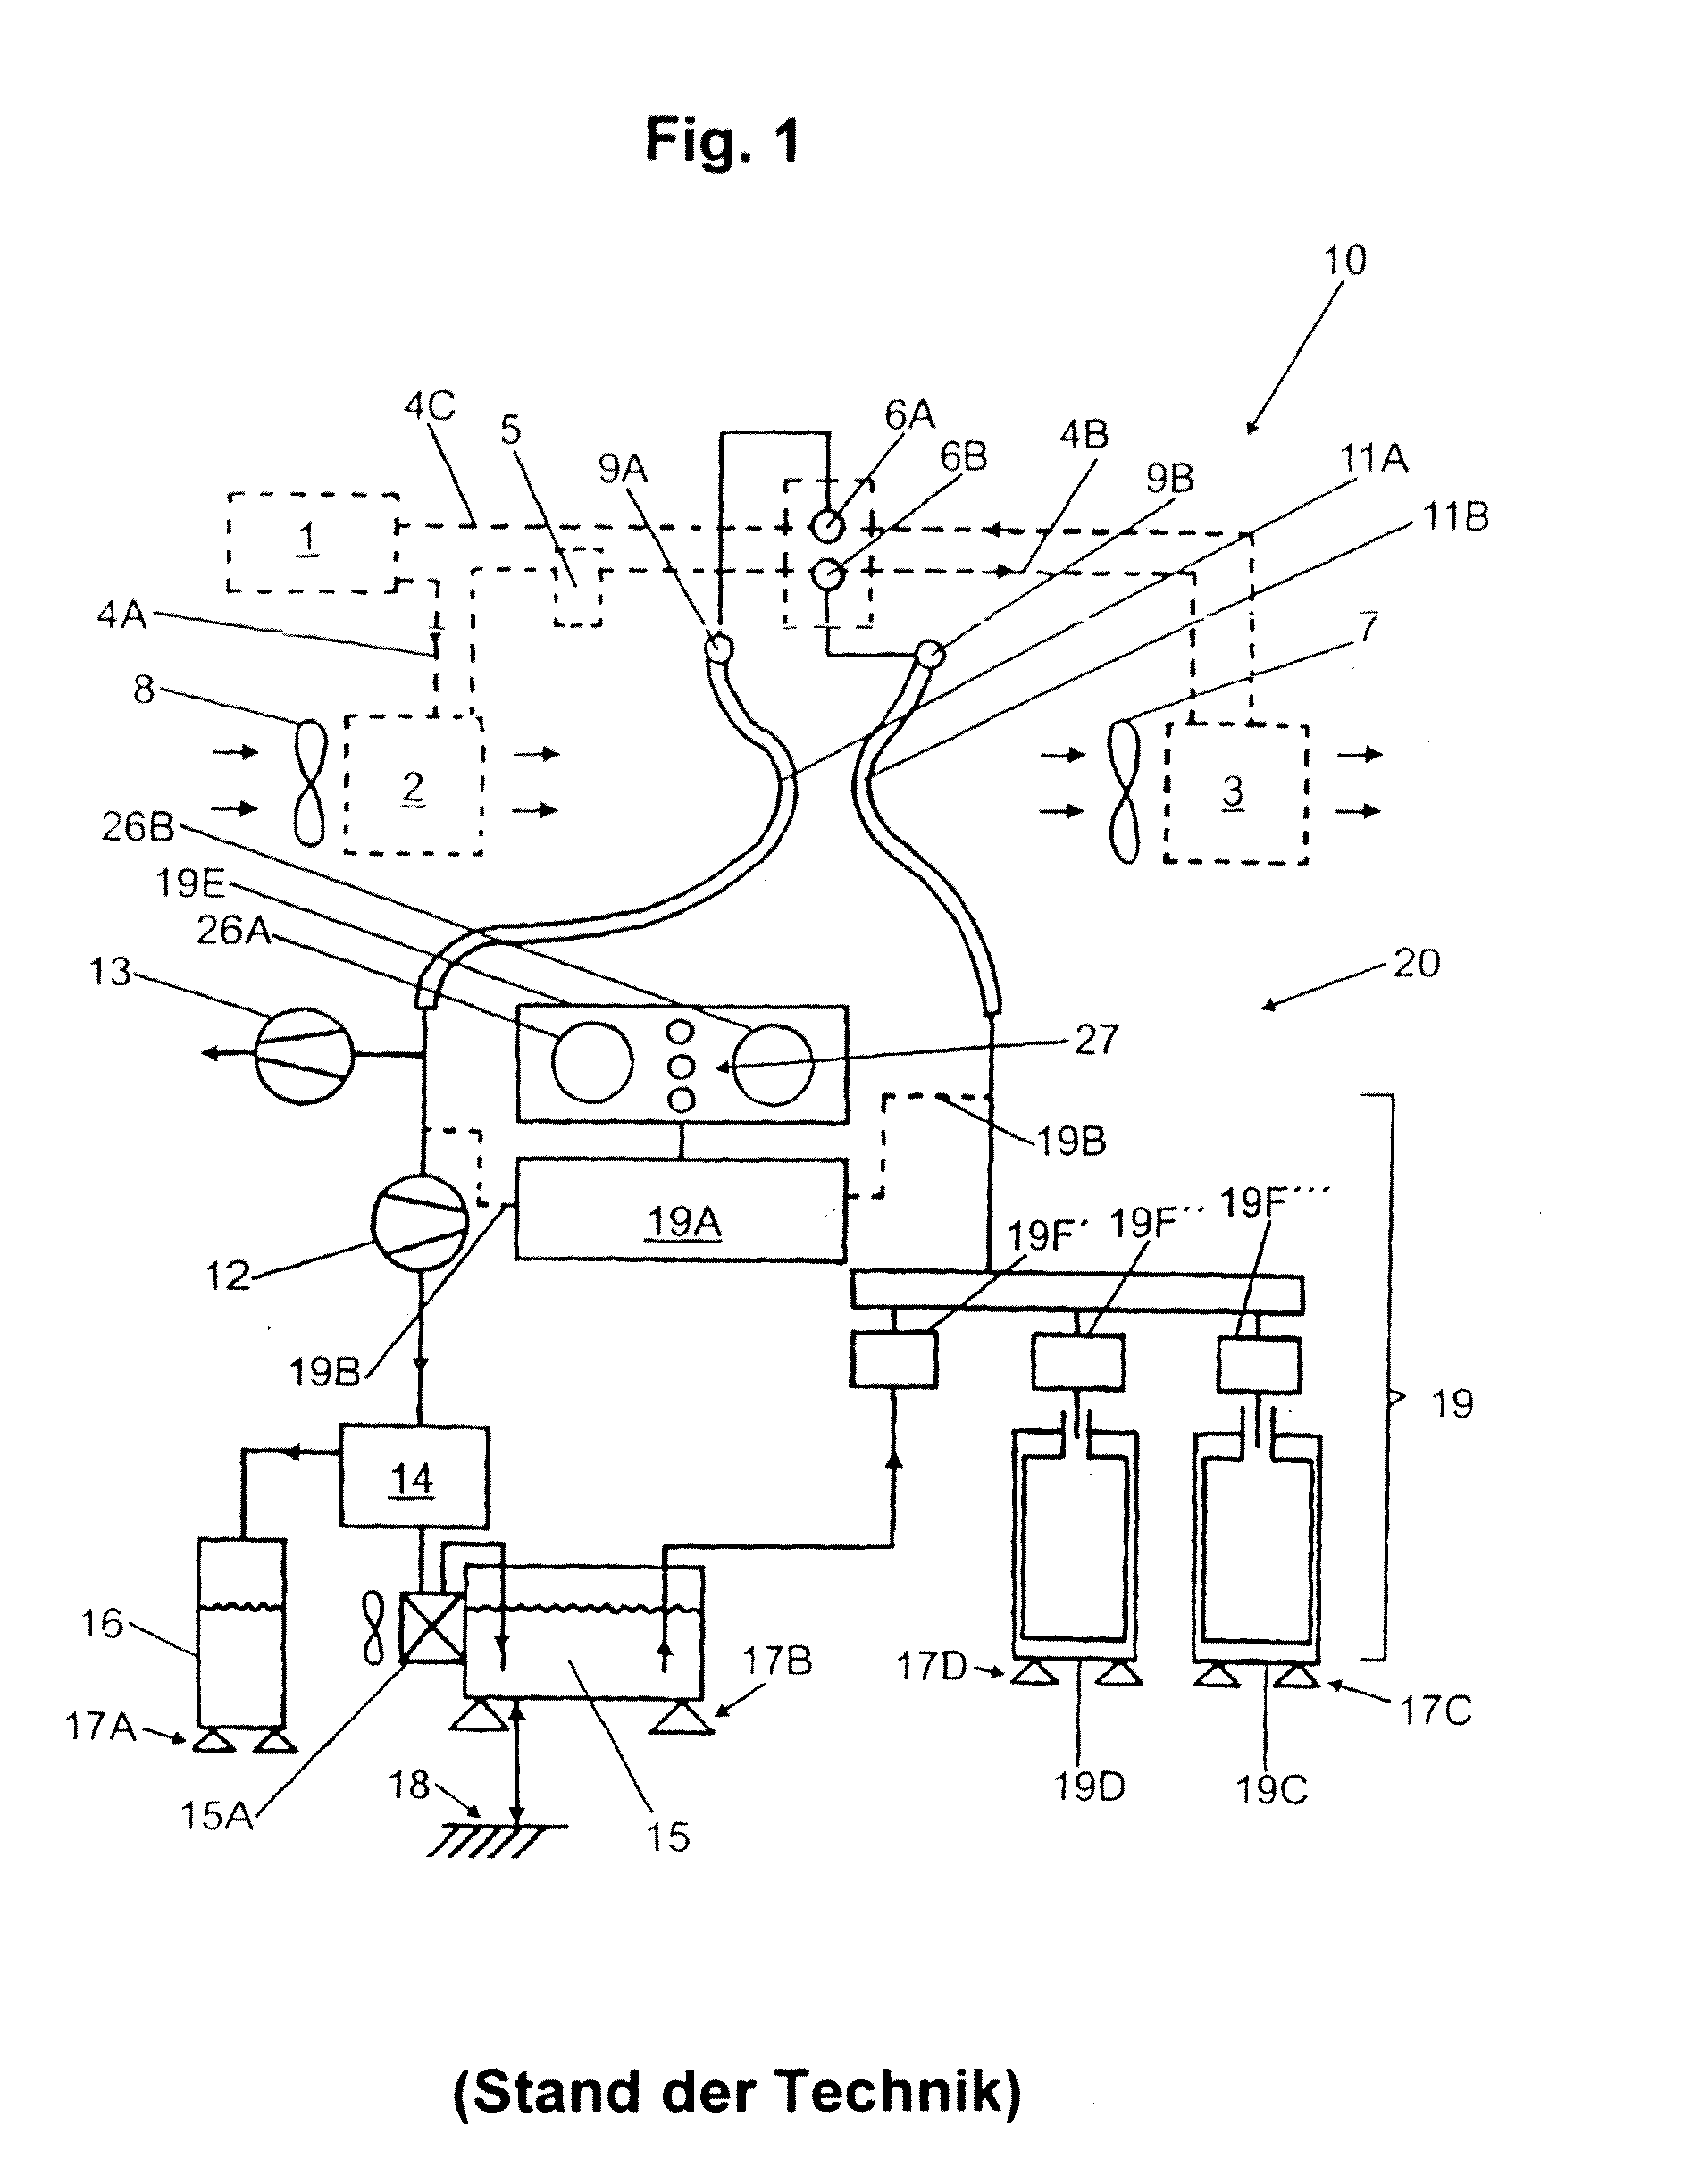 Method for maintaining a vehicle air conditioning unit and service apparatus therefor